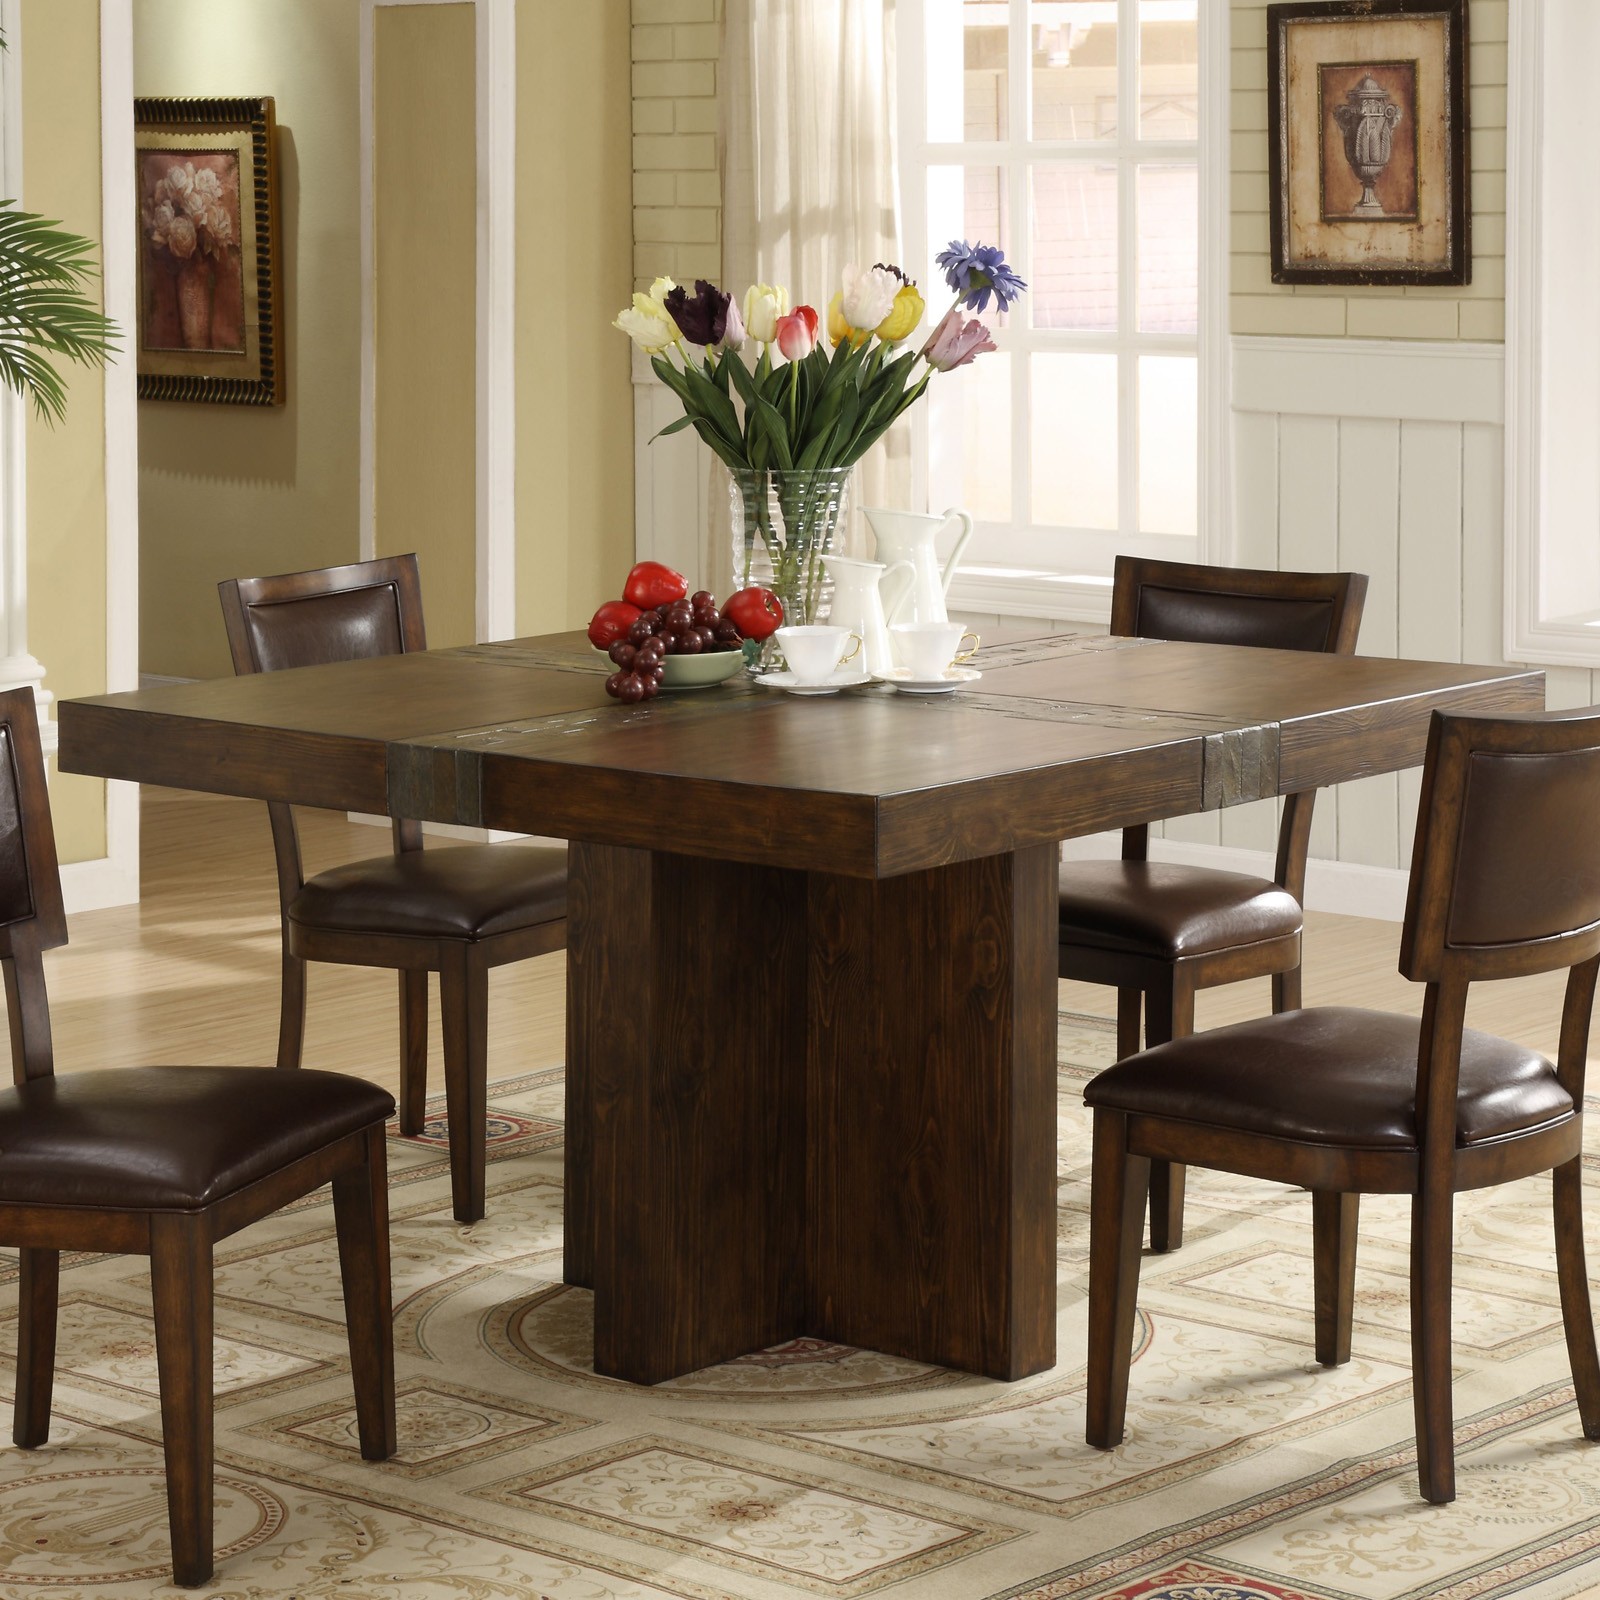 Square dining room table seats 8 2